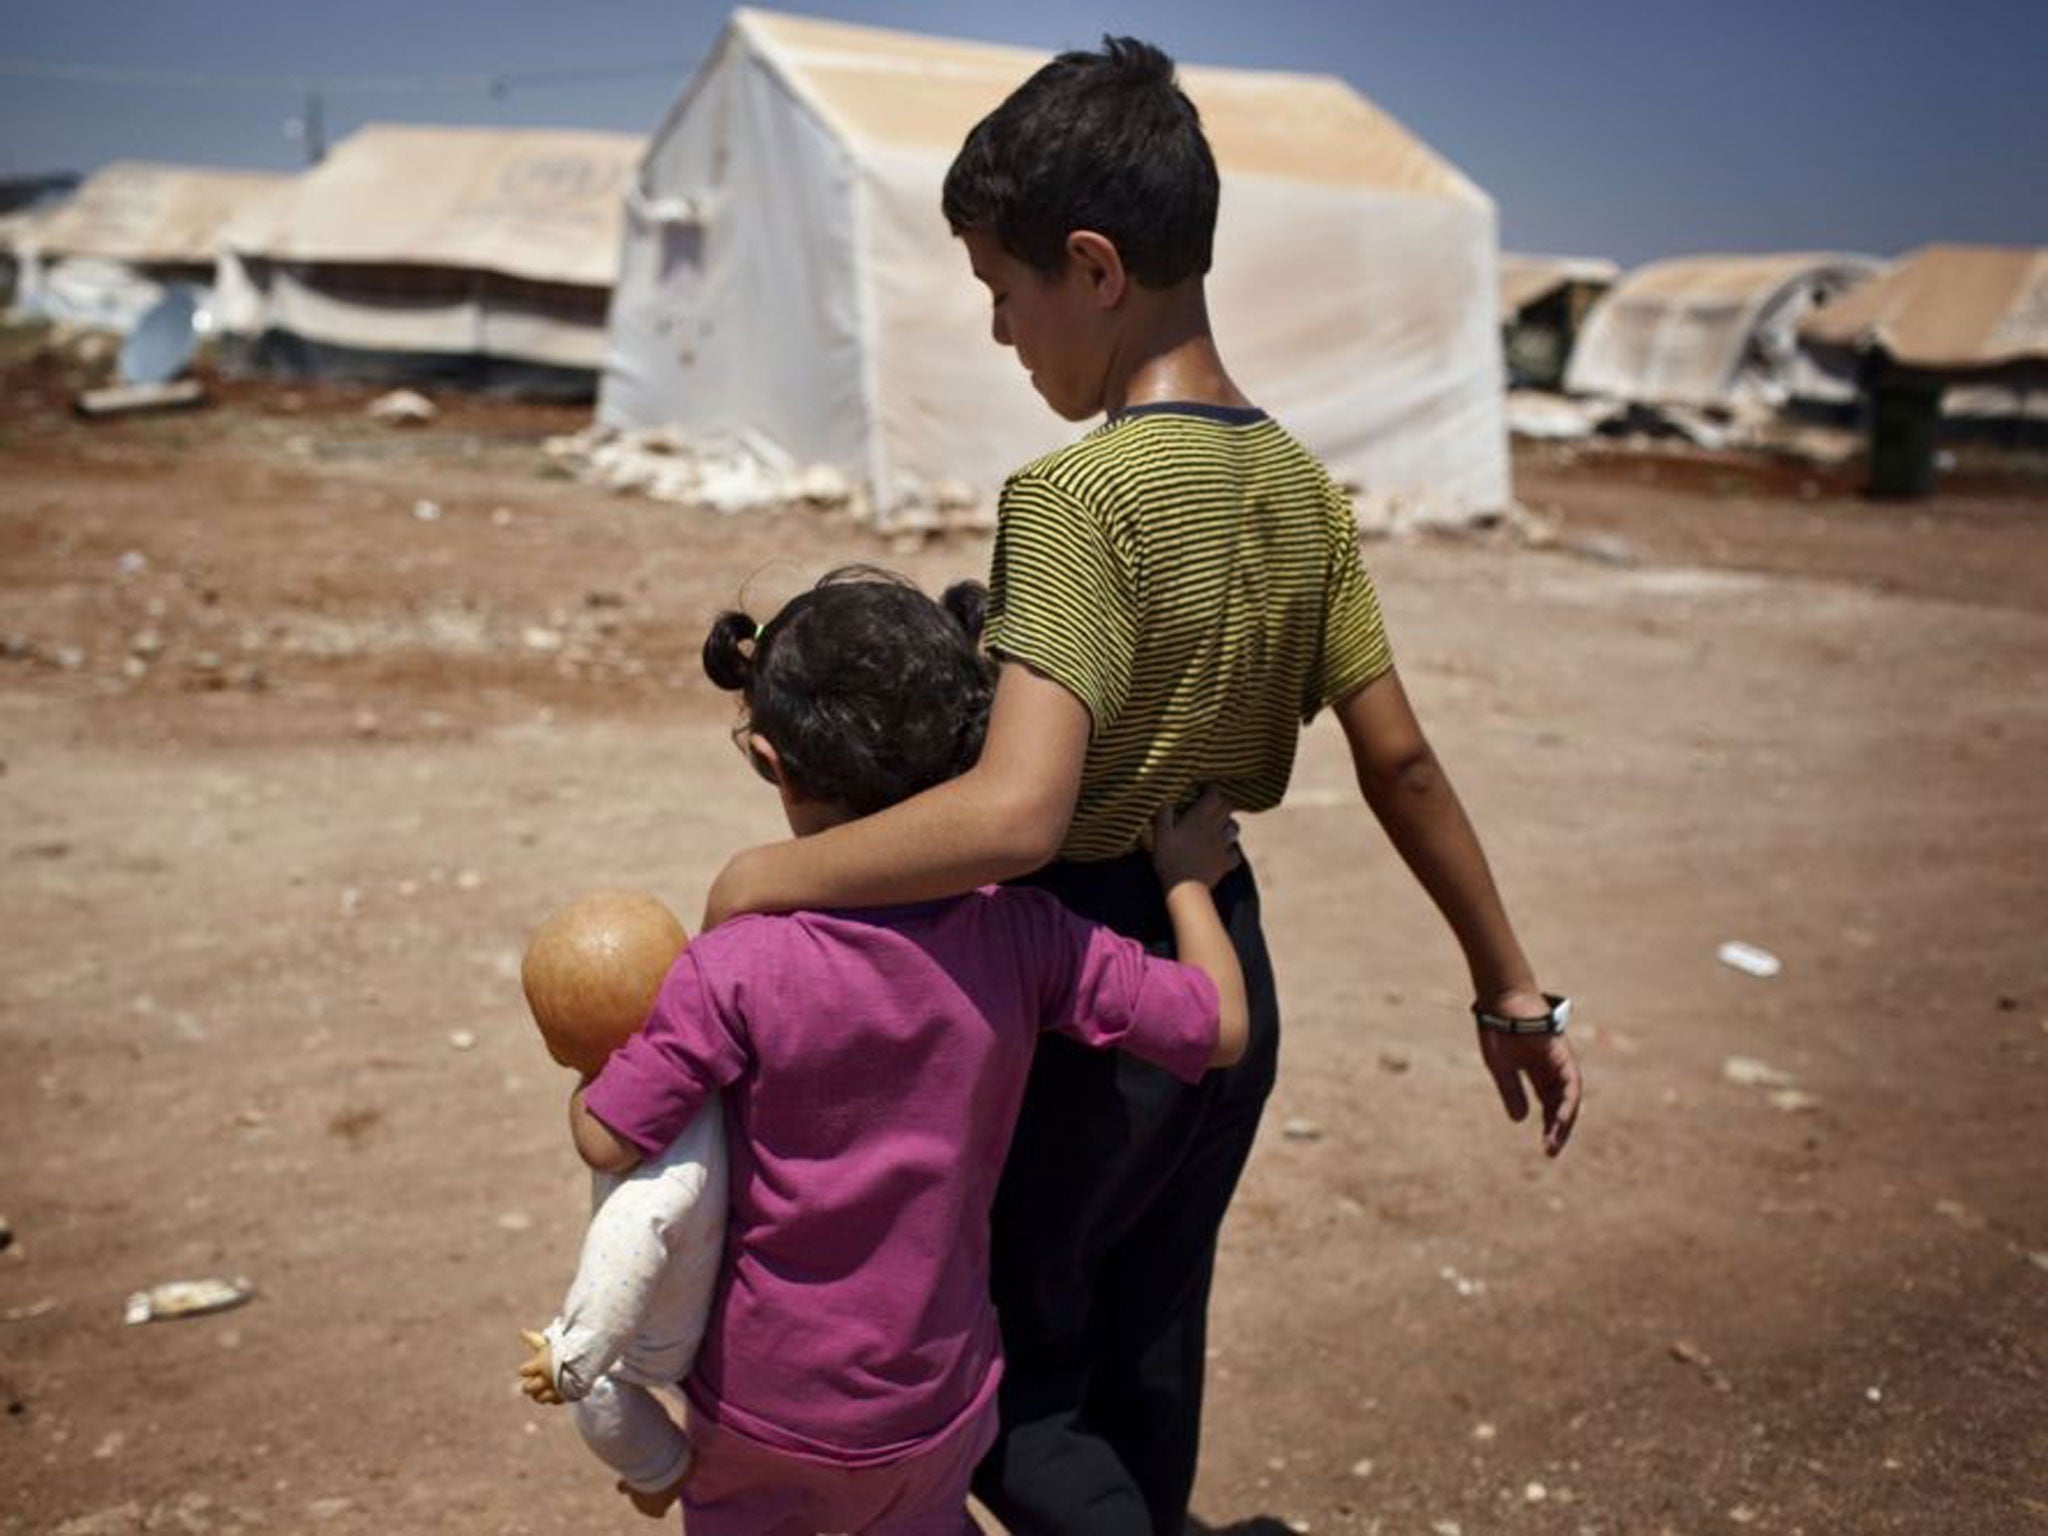 The Syrian refugee crisis is being described as the worst since the 1994 Rwanda Genocide